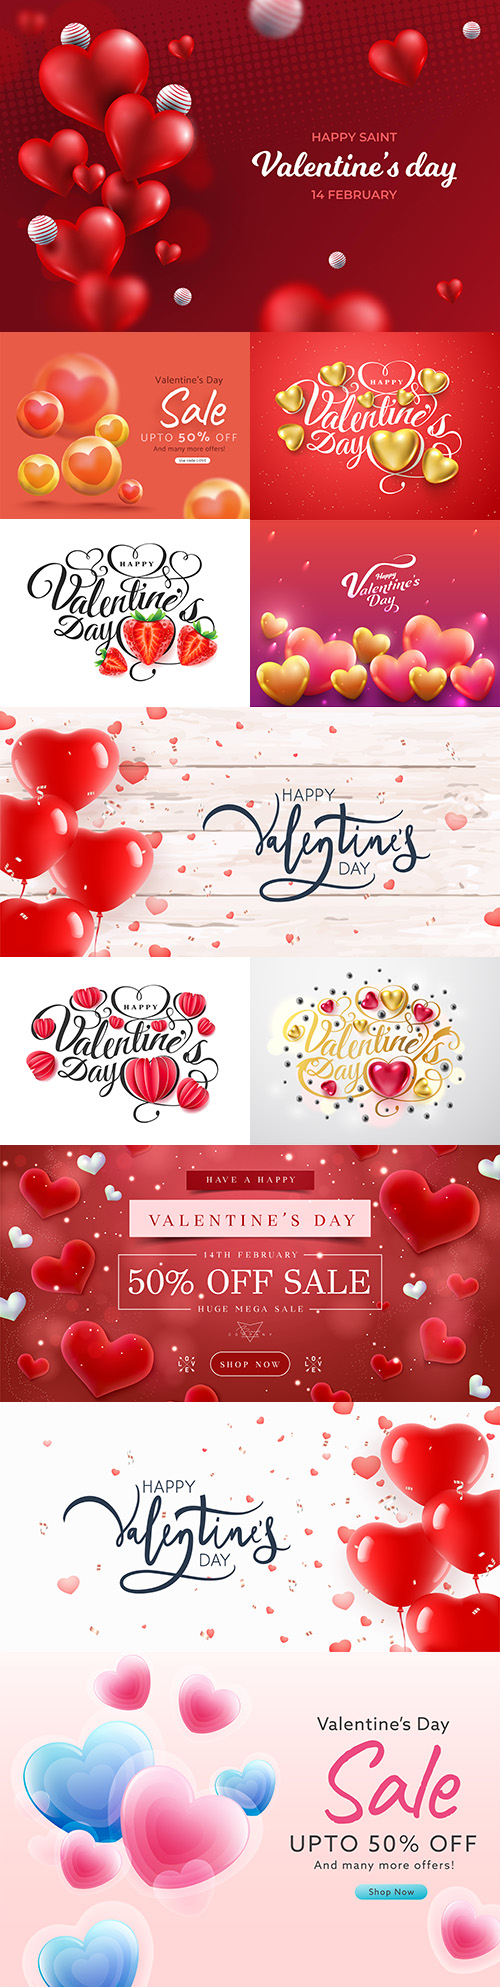 Happy Valentine's Day illustrations with heart-shaped balloons